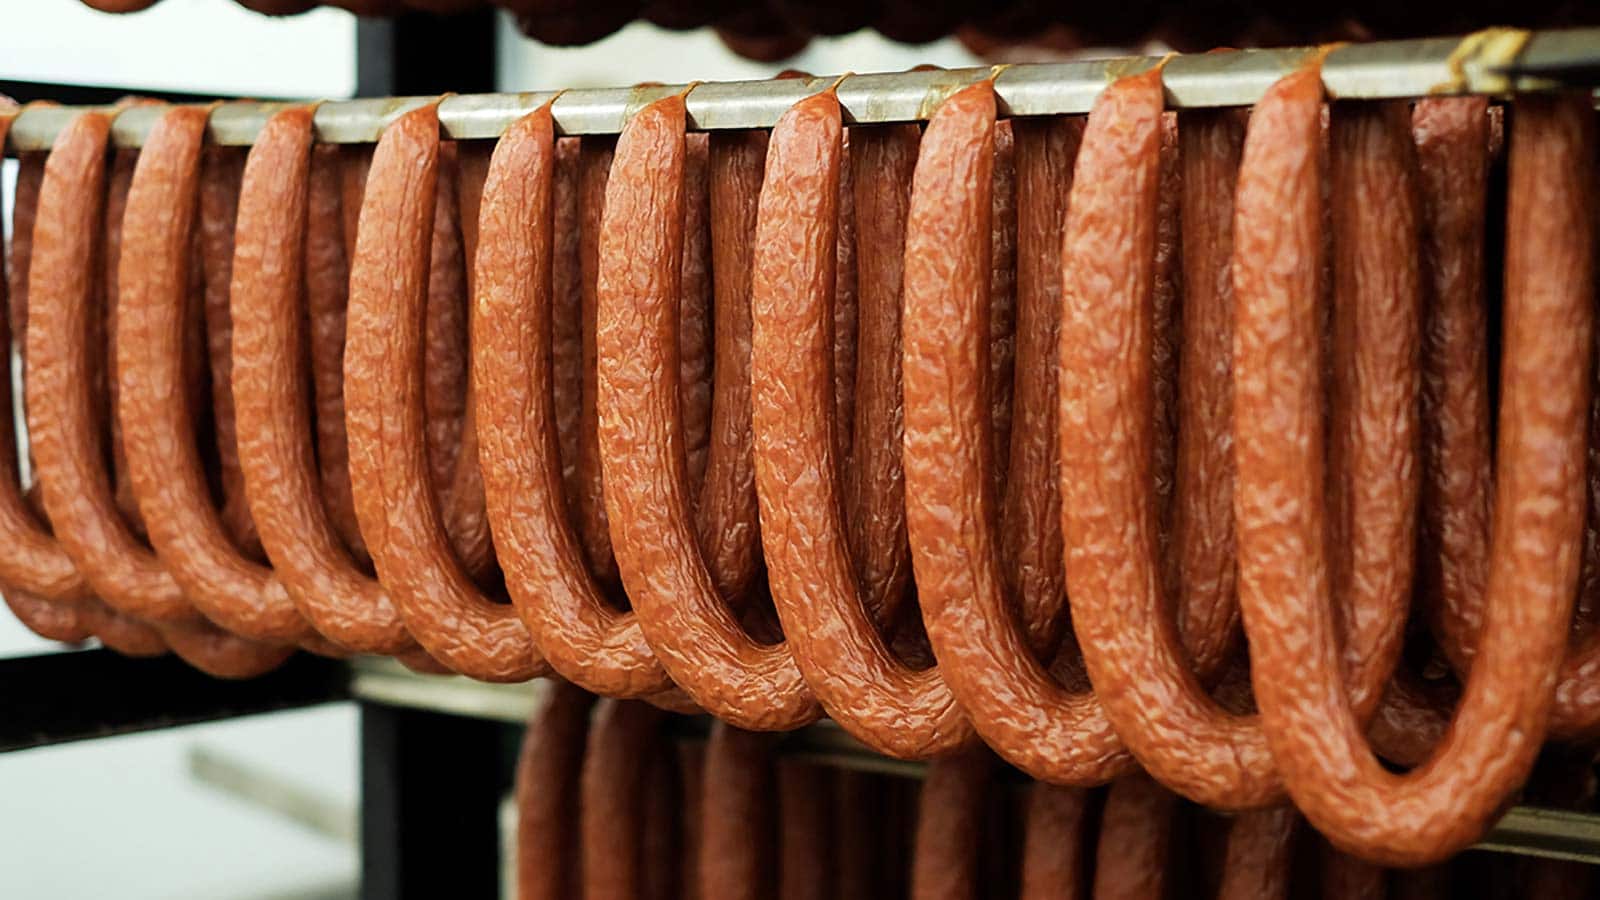 Rings of Stawnichy's sausage on a rack.